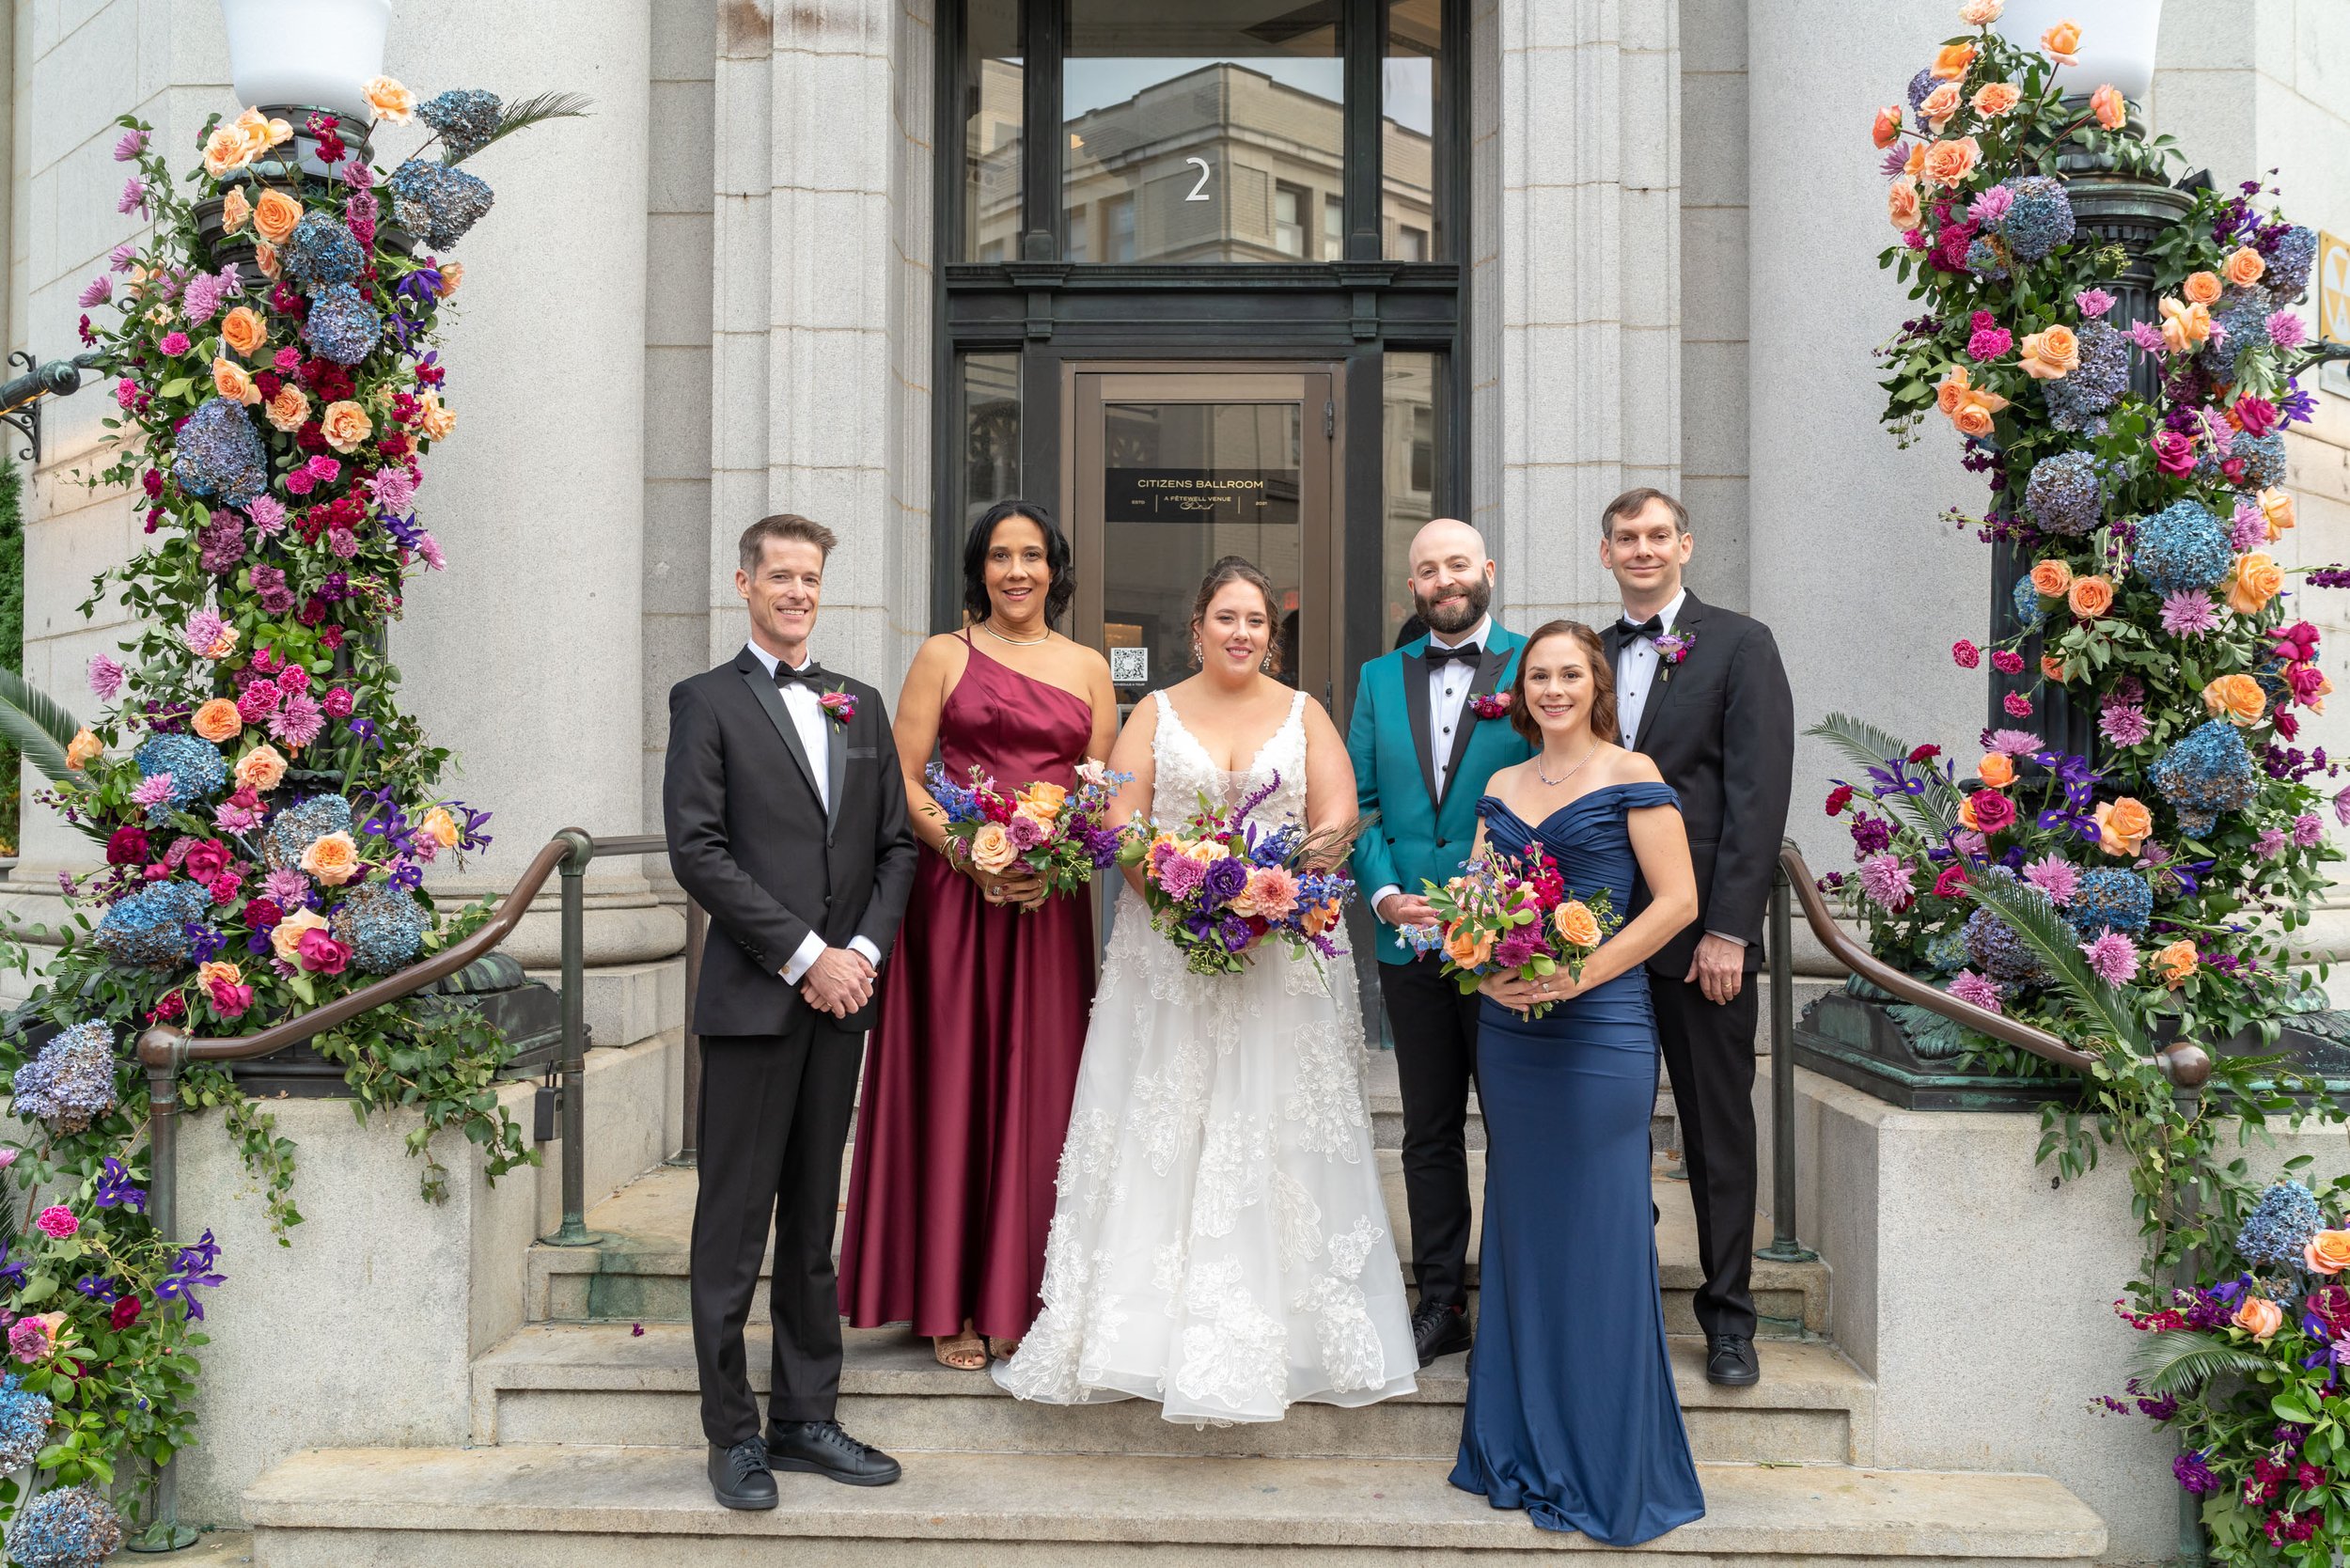 Wedding party on front steps of historic Citizen's Ballroom 